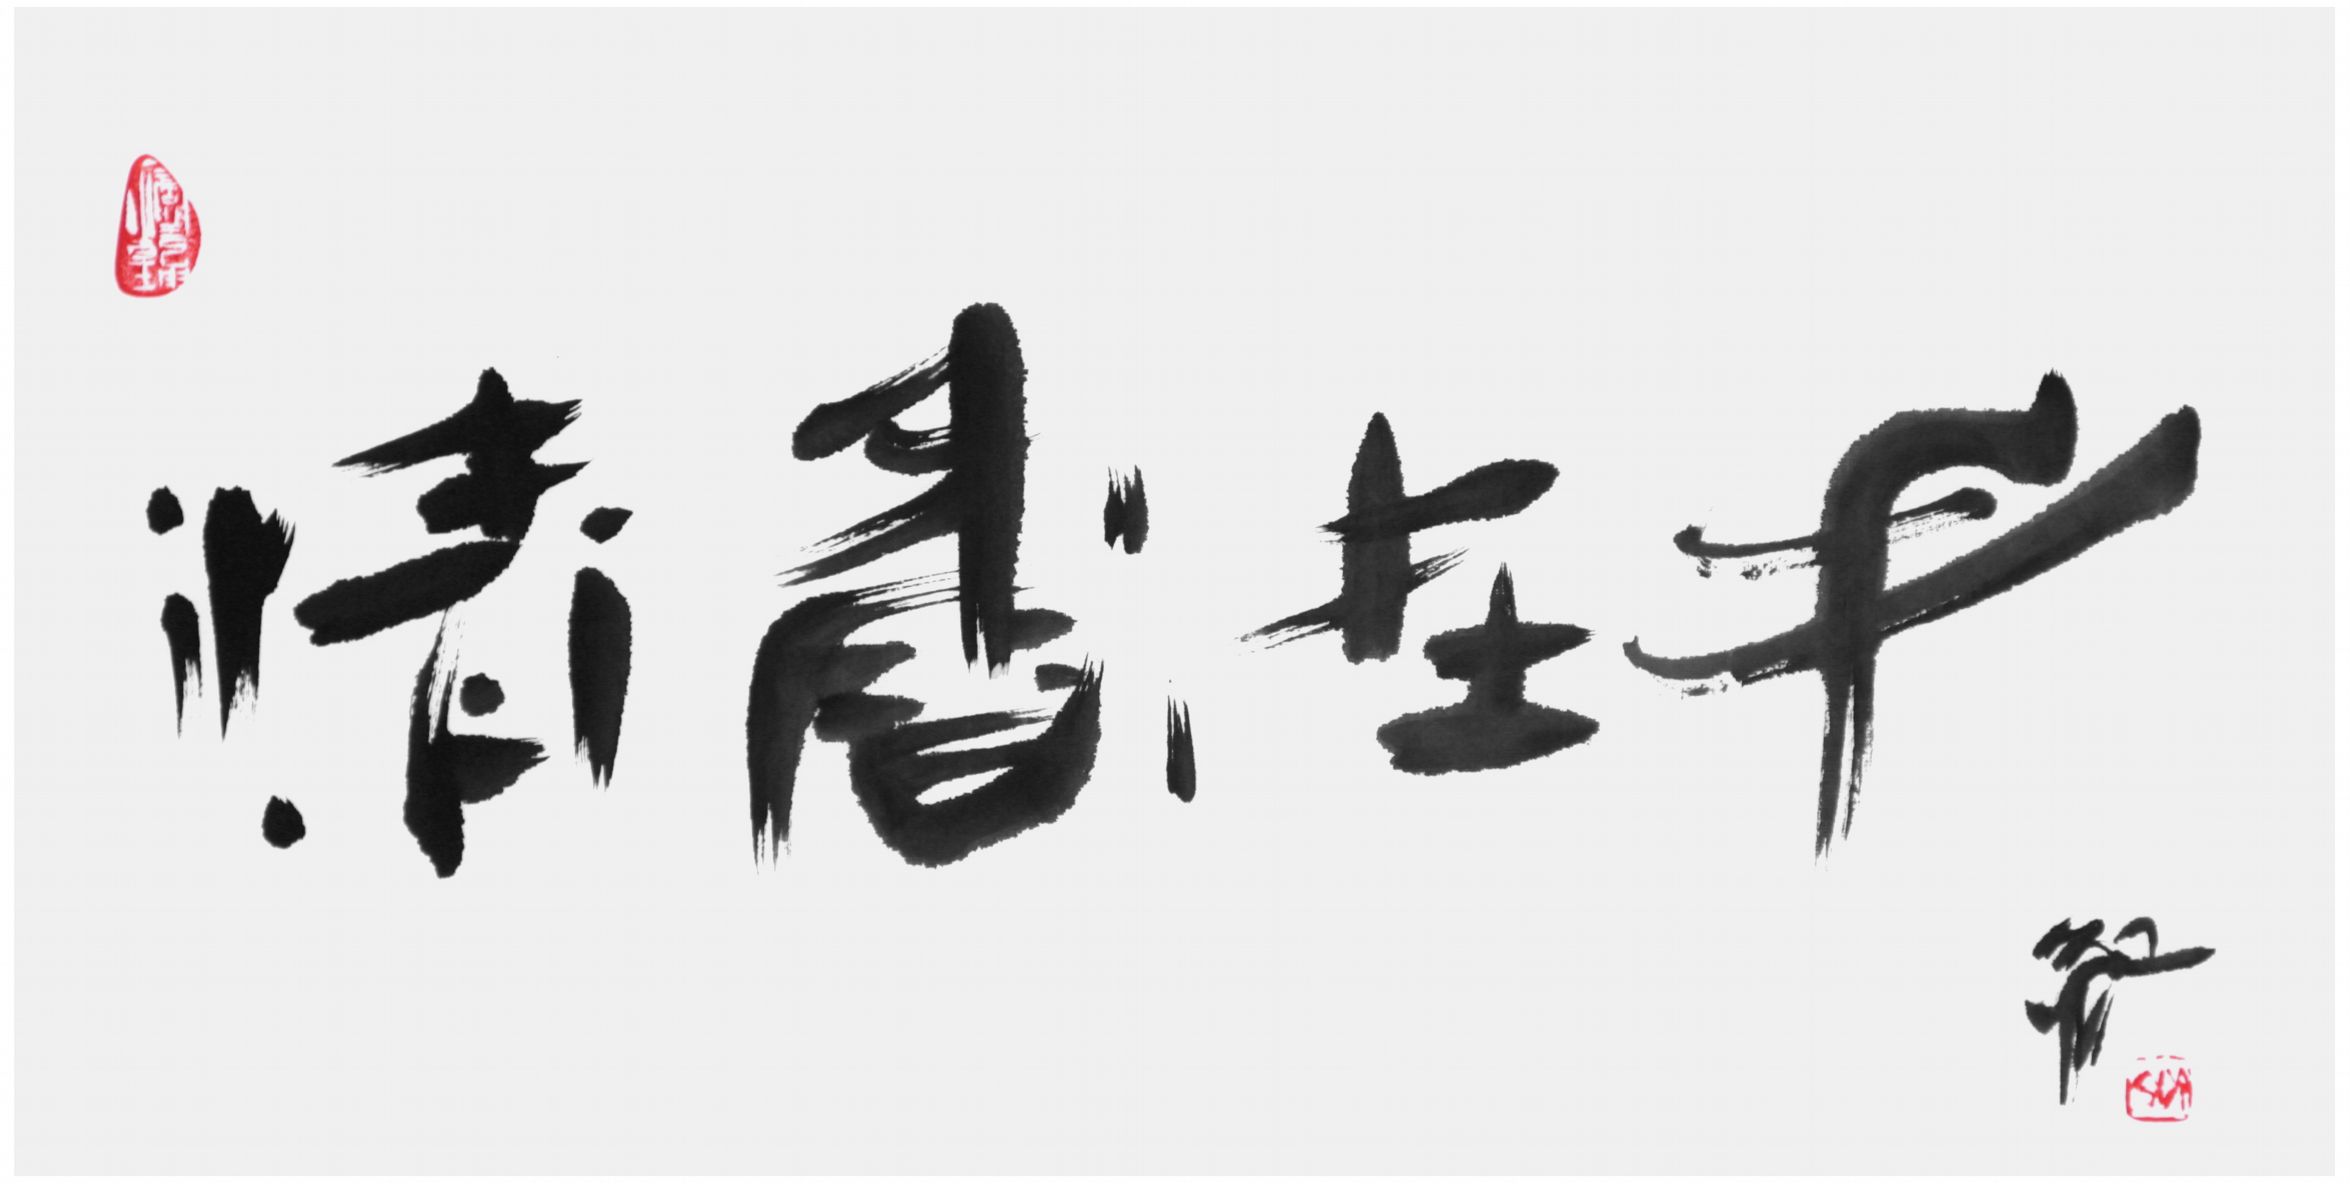 Qi Hong (Sai Koh) 's freehand brushwork style semi-seal script Chinese calligraphy, Hands With the Scent of Tea, 69×34cm, Ink - Qi Hong (Sai Koh) Calligraphy Web